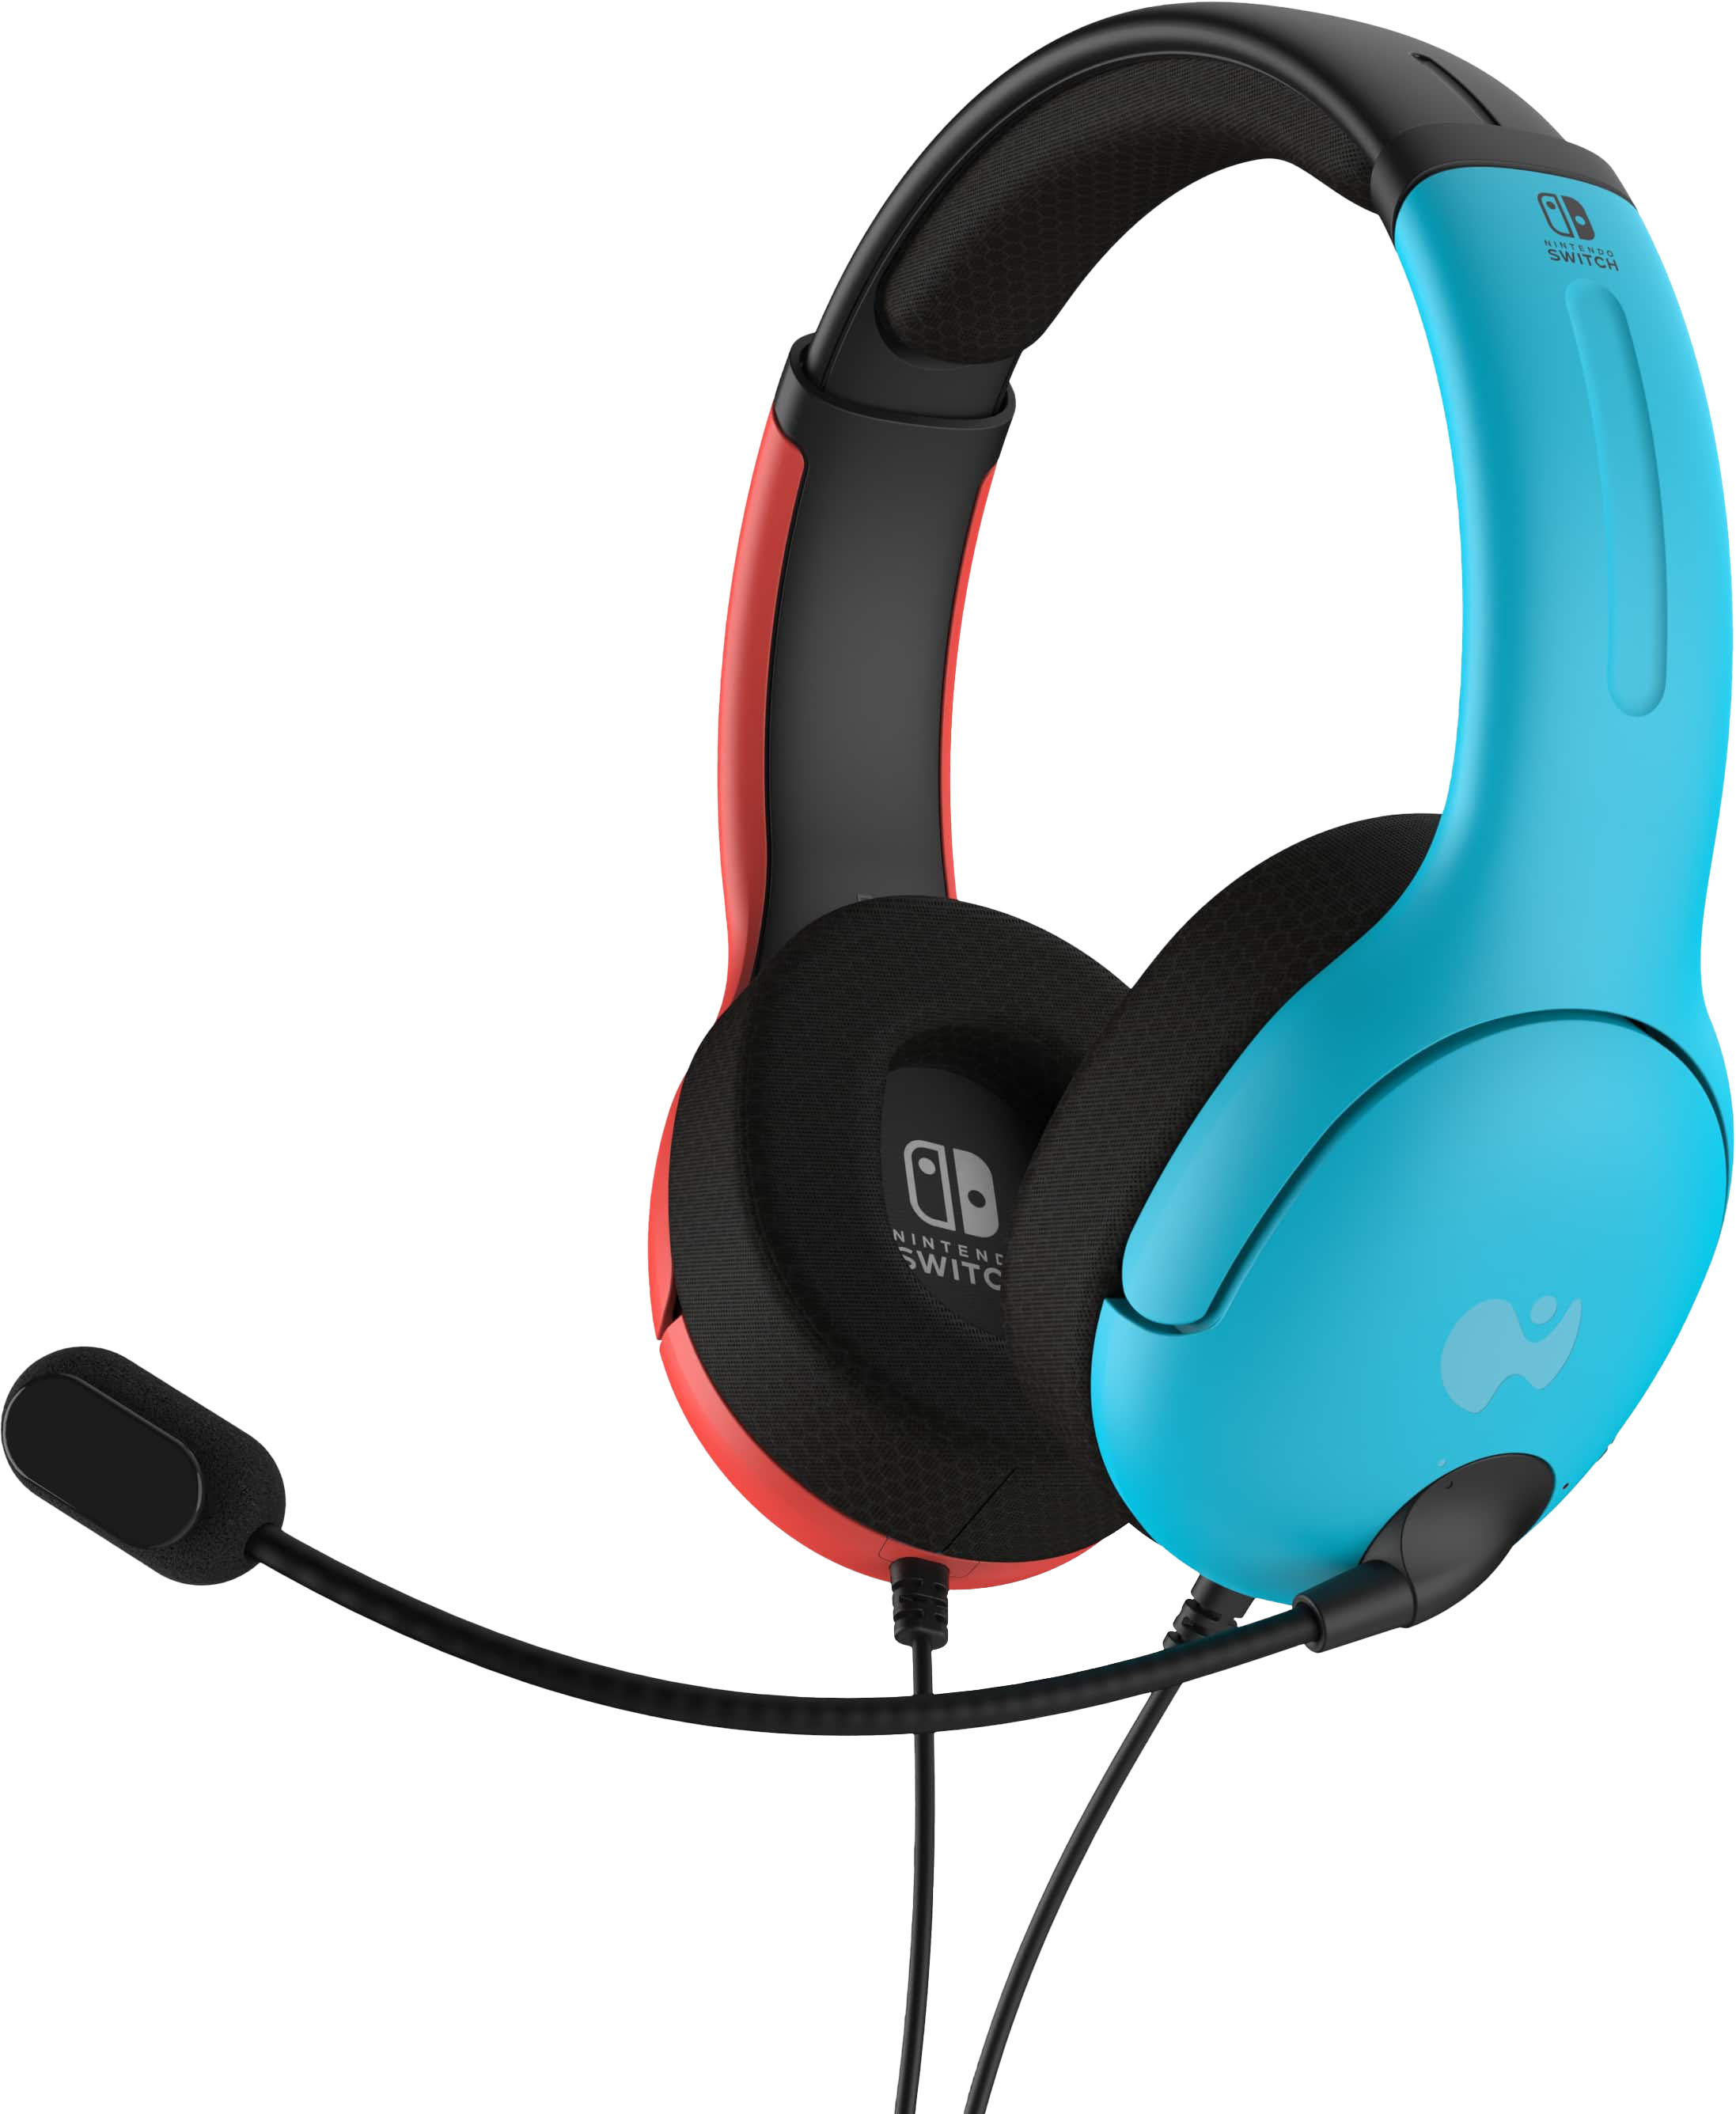 pdp Officially Licensed LVL 40 stereo headset (Switch and Switch Lite  compatible)